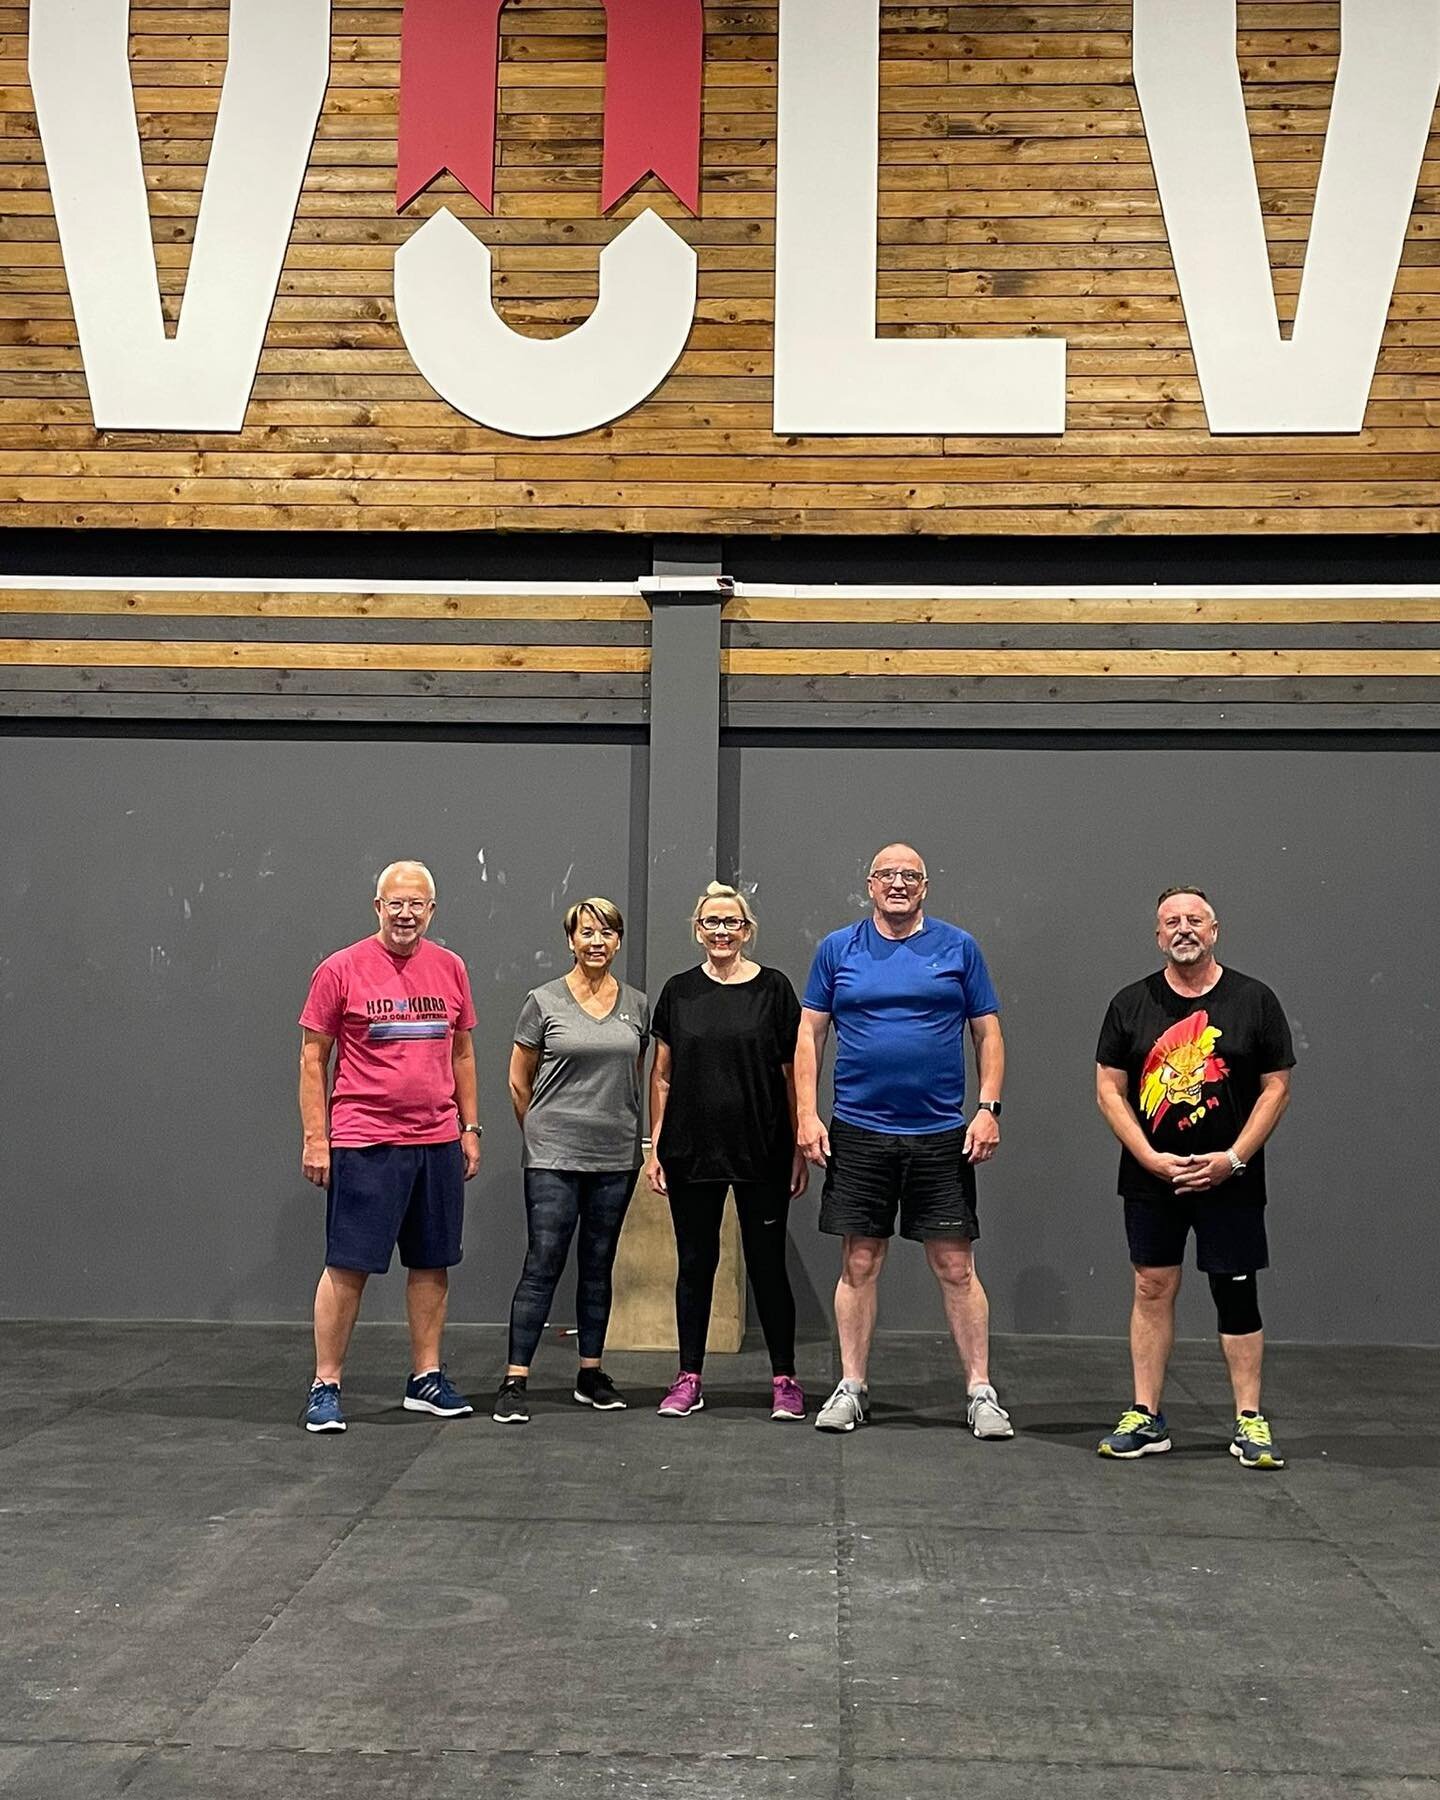 EVOLVE MASTERS

Our Evolve Masters are group classes for the 60+ age group.

We run 3 sessions per week with each session focusing on different training methods to help you get the very best from your training. The programme includes -

Strength
Flex